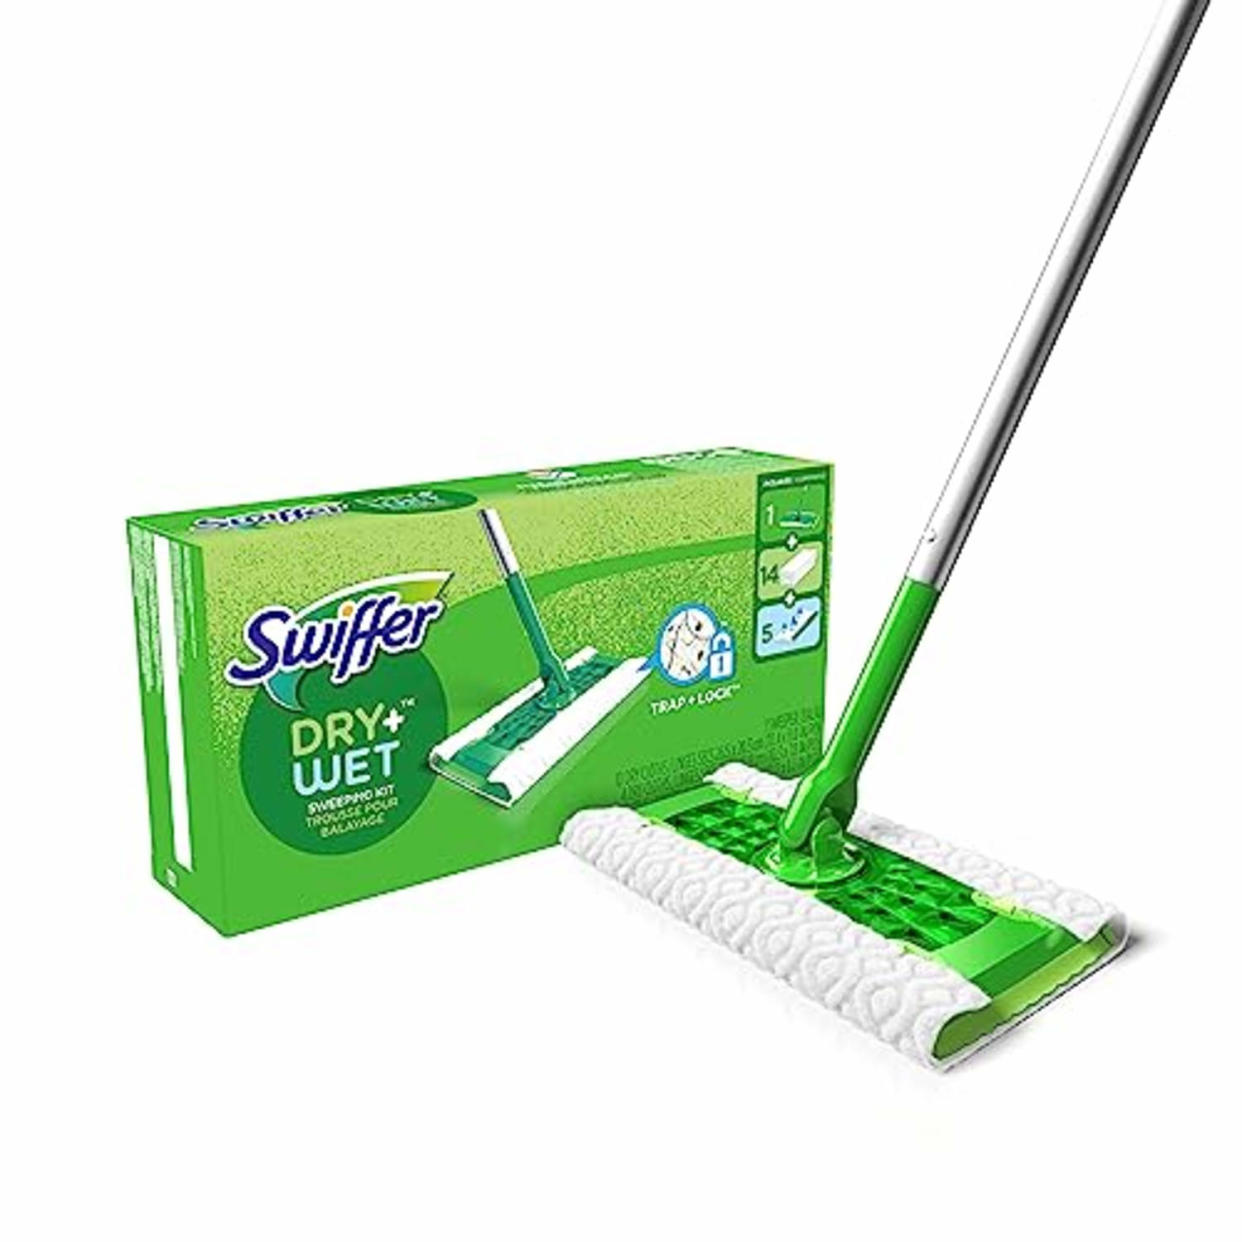 Swiffer Sweeper 2-in-1 Mops for Floor Cleaning, Dry and Wet Multi Surface Floor Cleaner, Sweeping and Mopping Starter Kit, Includes 1 Mop + 19 Refills, 20 Piece Set (AMAZON)